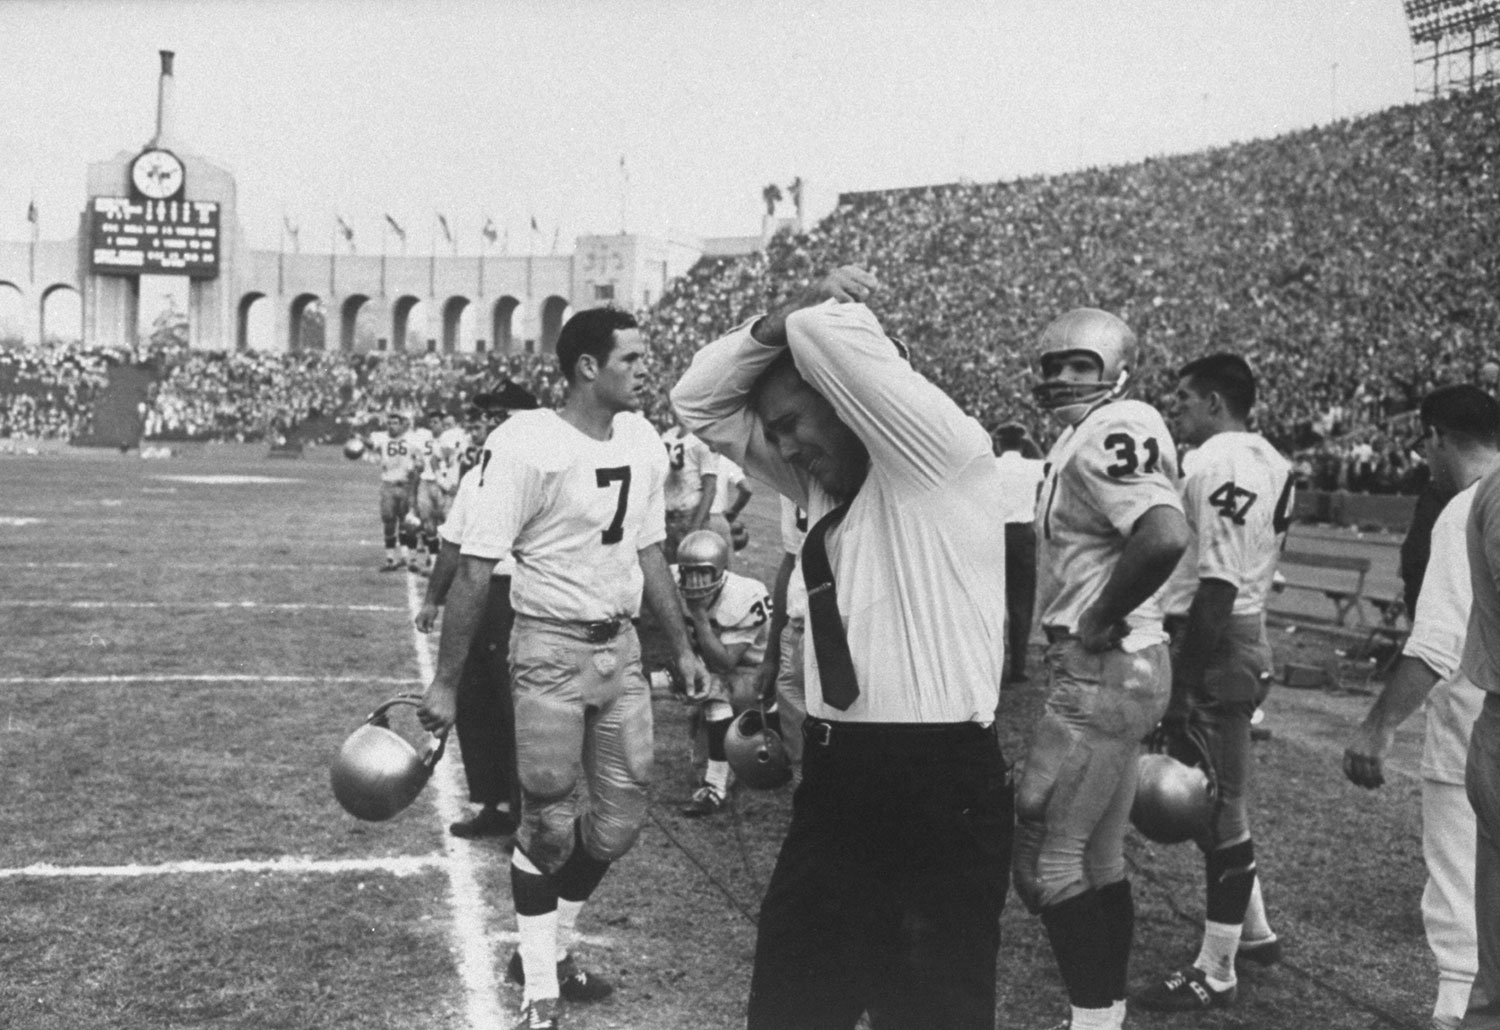 Notre Dame's legendary coach Ara Parseghian can't bear watching as the Fighting Irish lose in 1964.